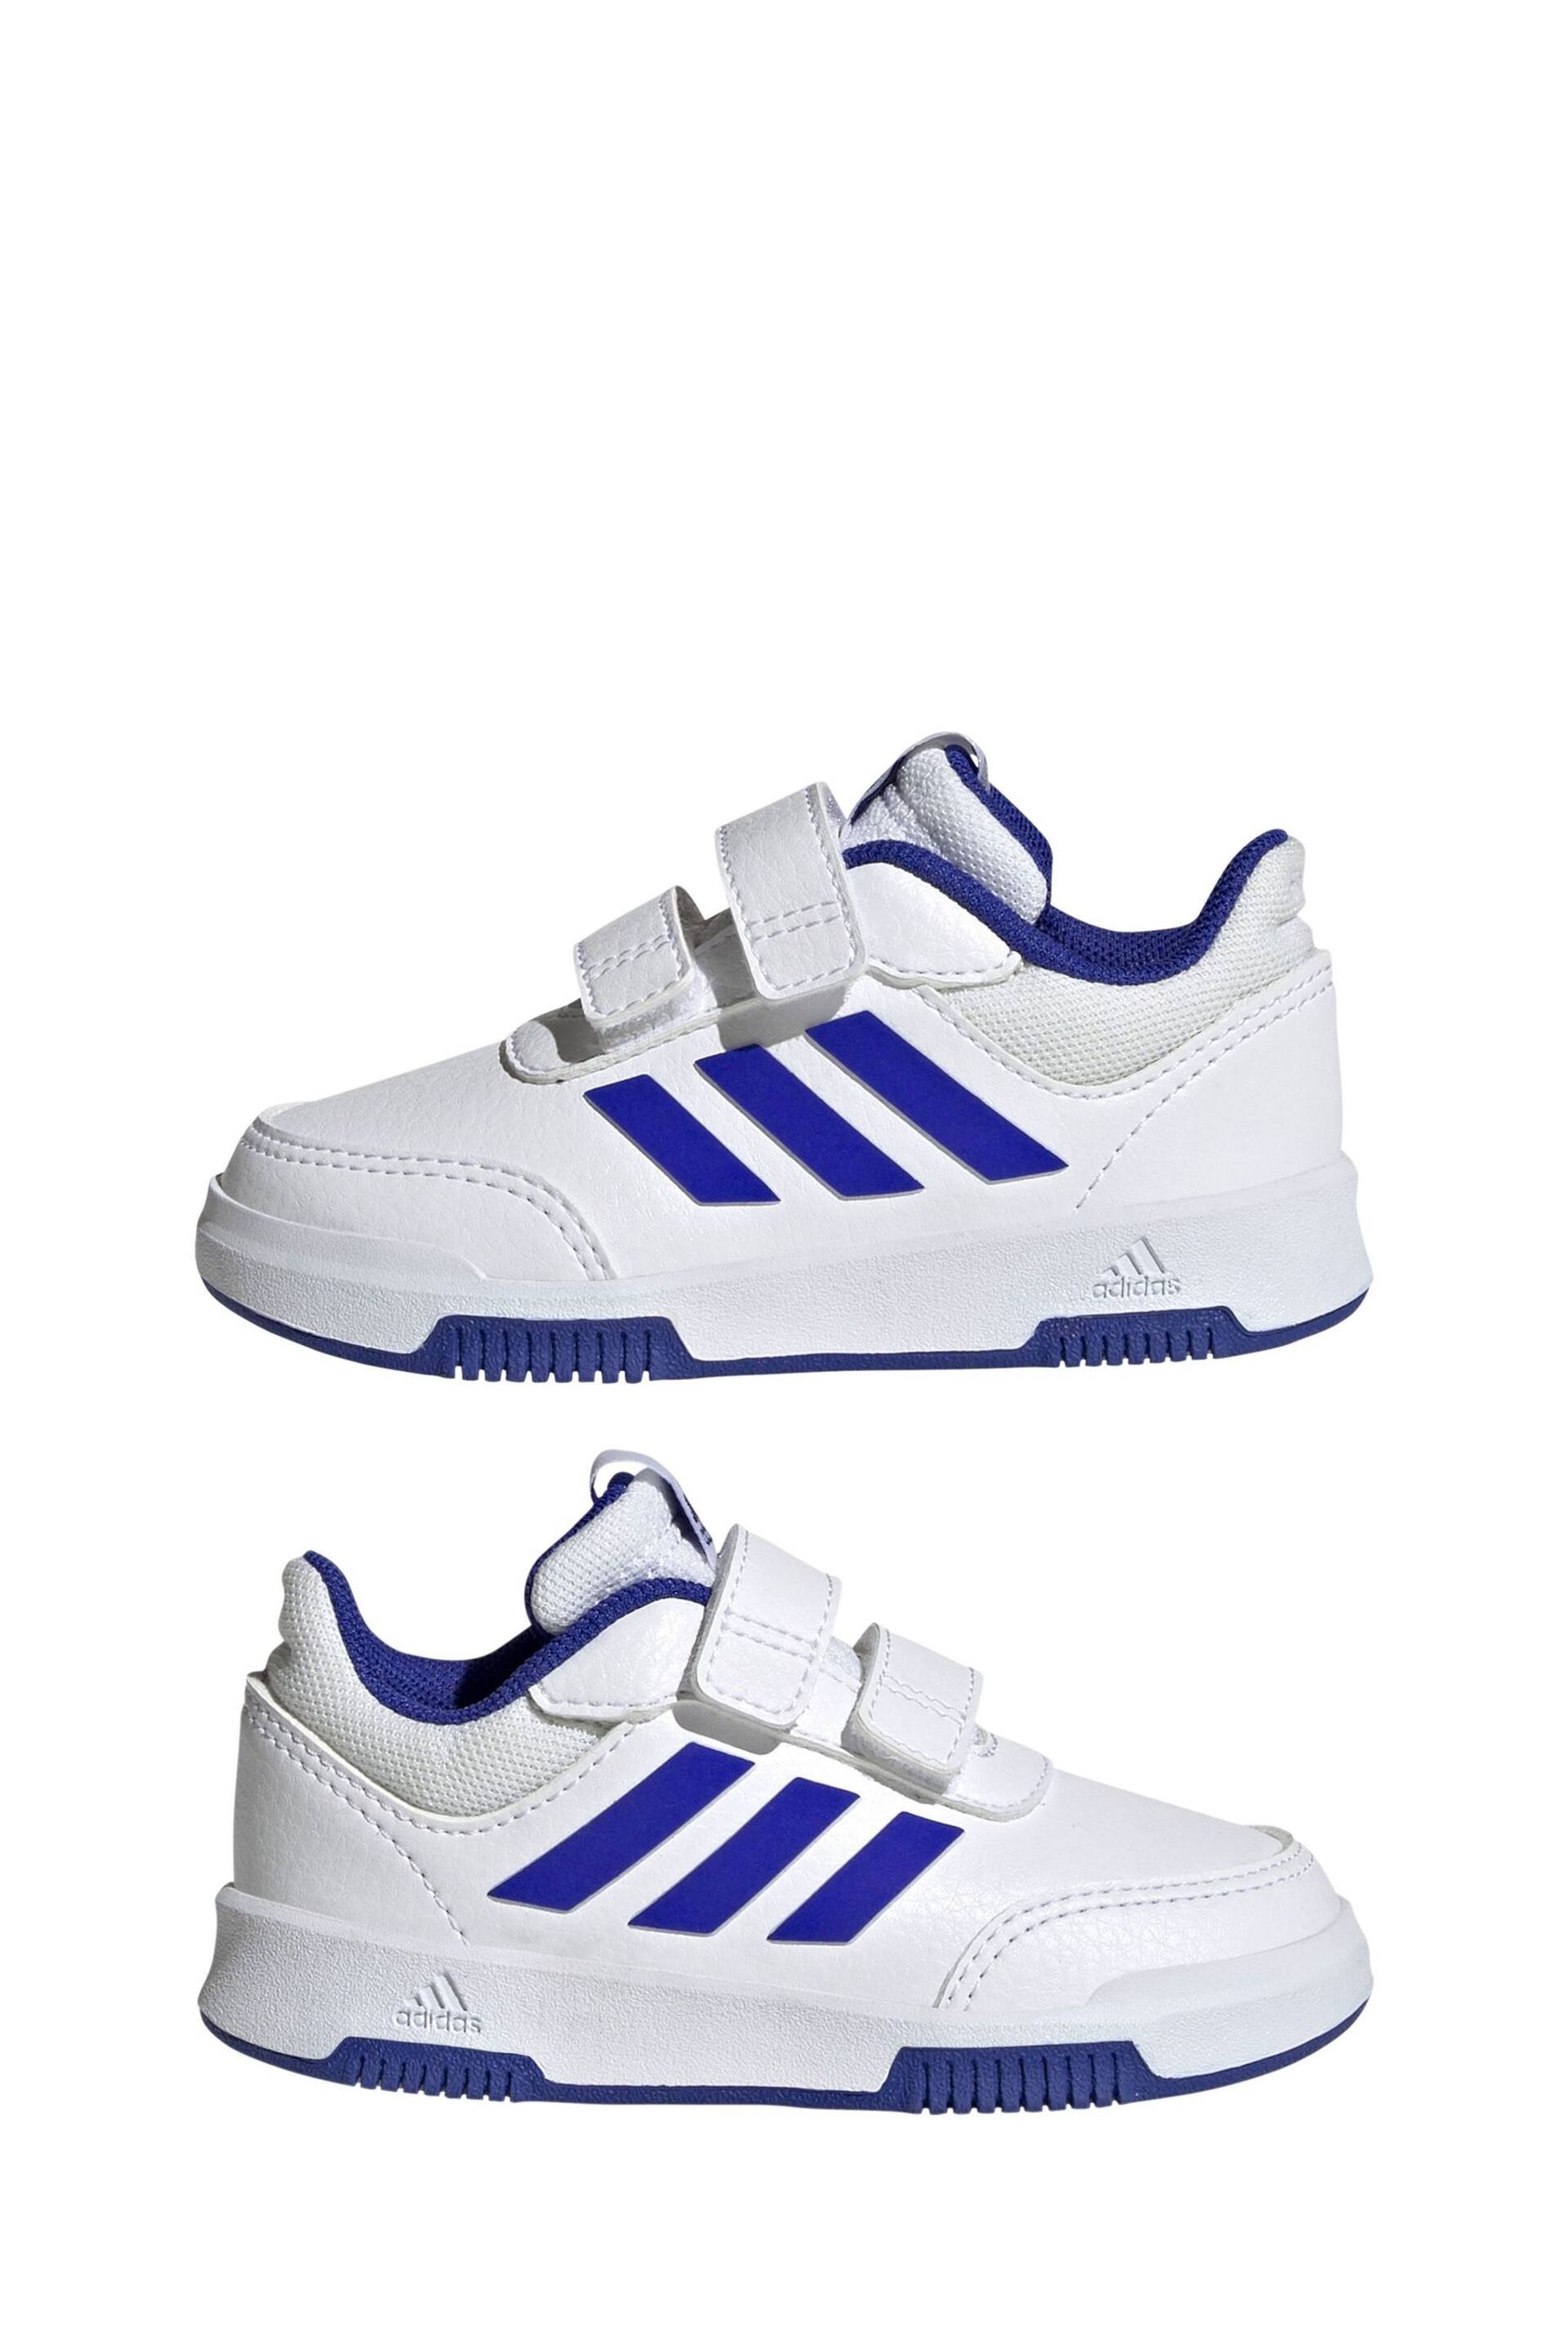 adidas White/Blue Tensaur Hook and Loop Shoes - Image 5 of 9